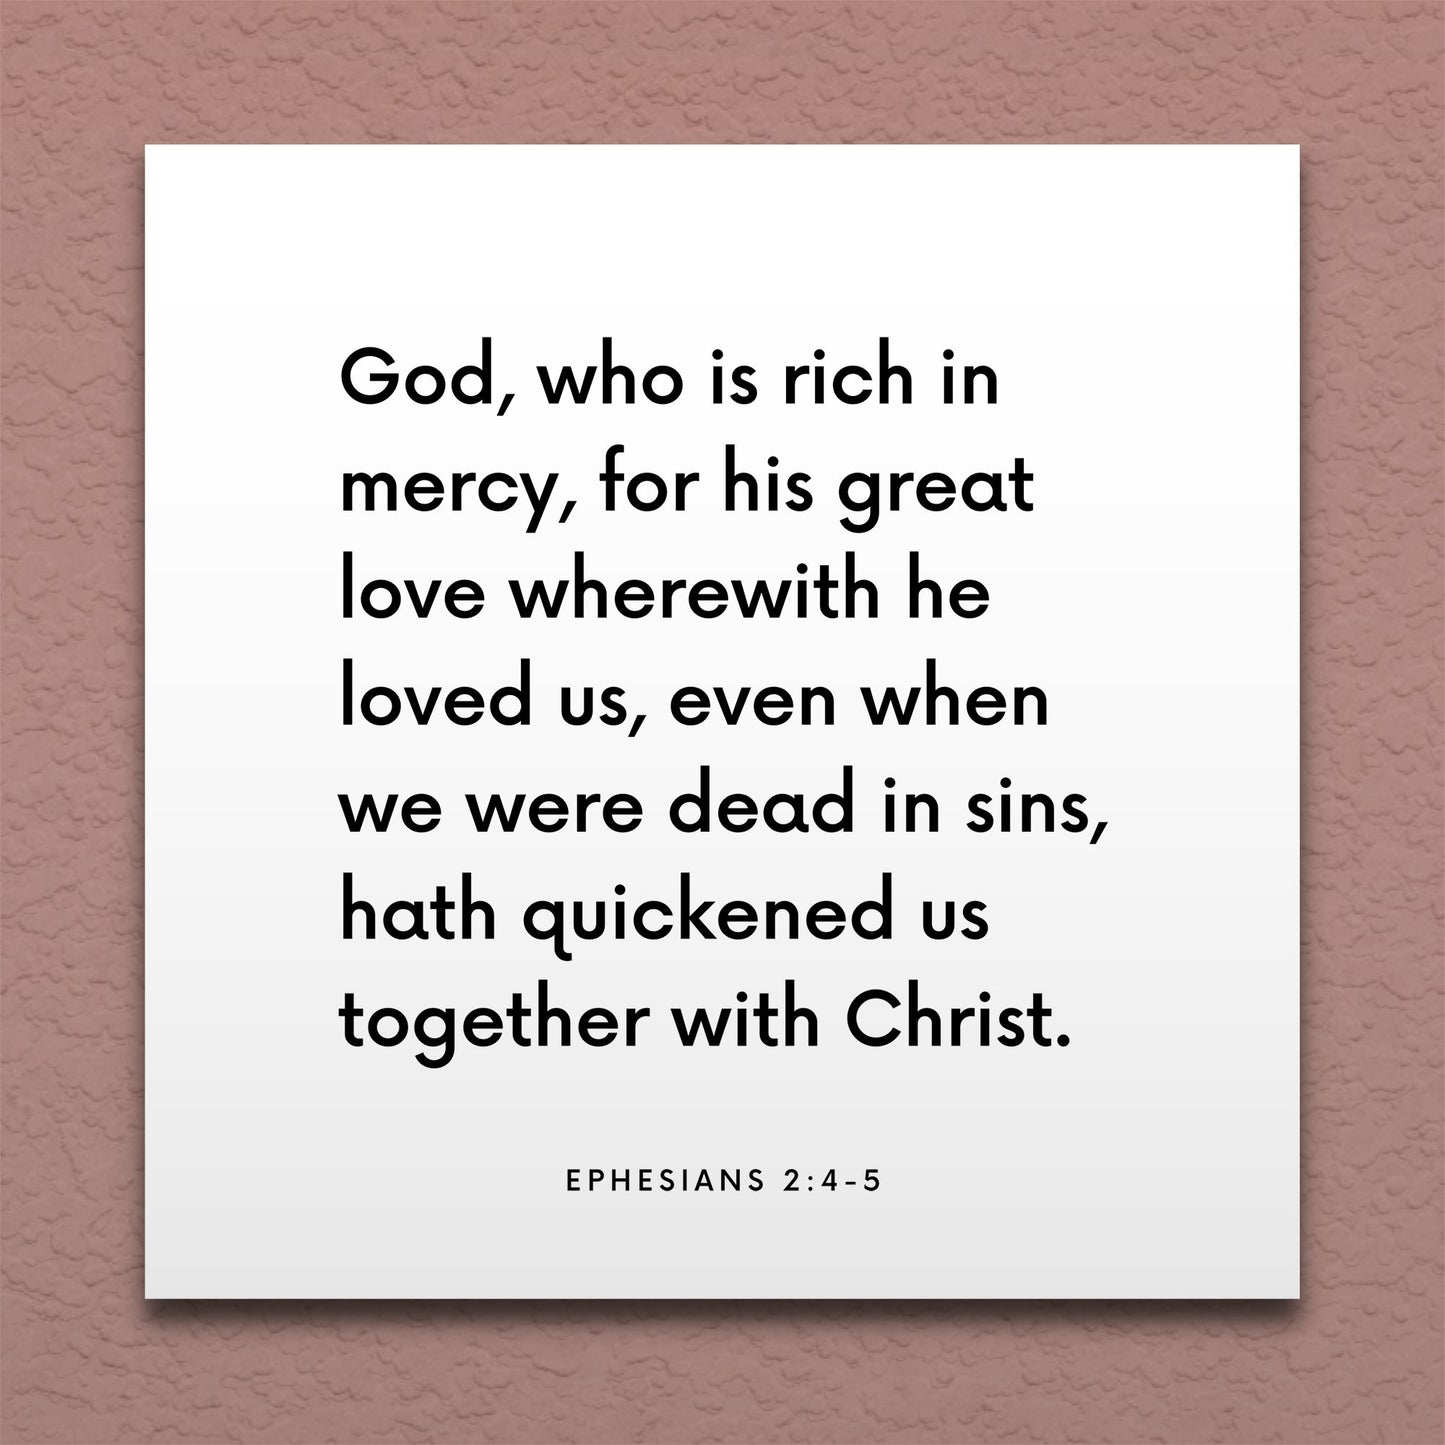 Wall-mounted scripture tile for Ephesians 2:4-5 - "God, who is rich in mercy"